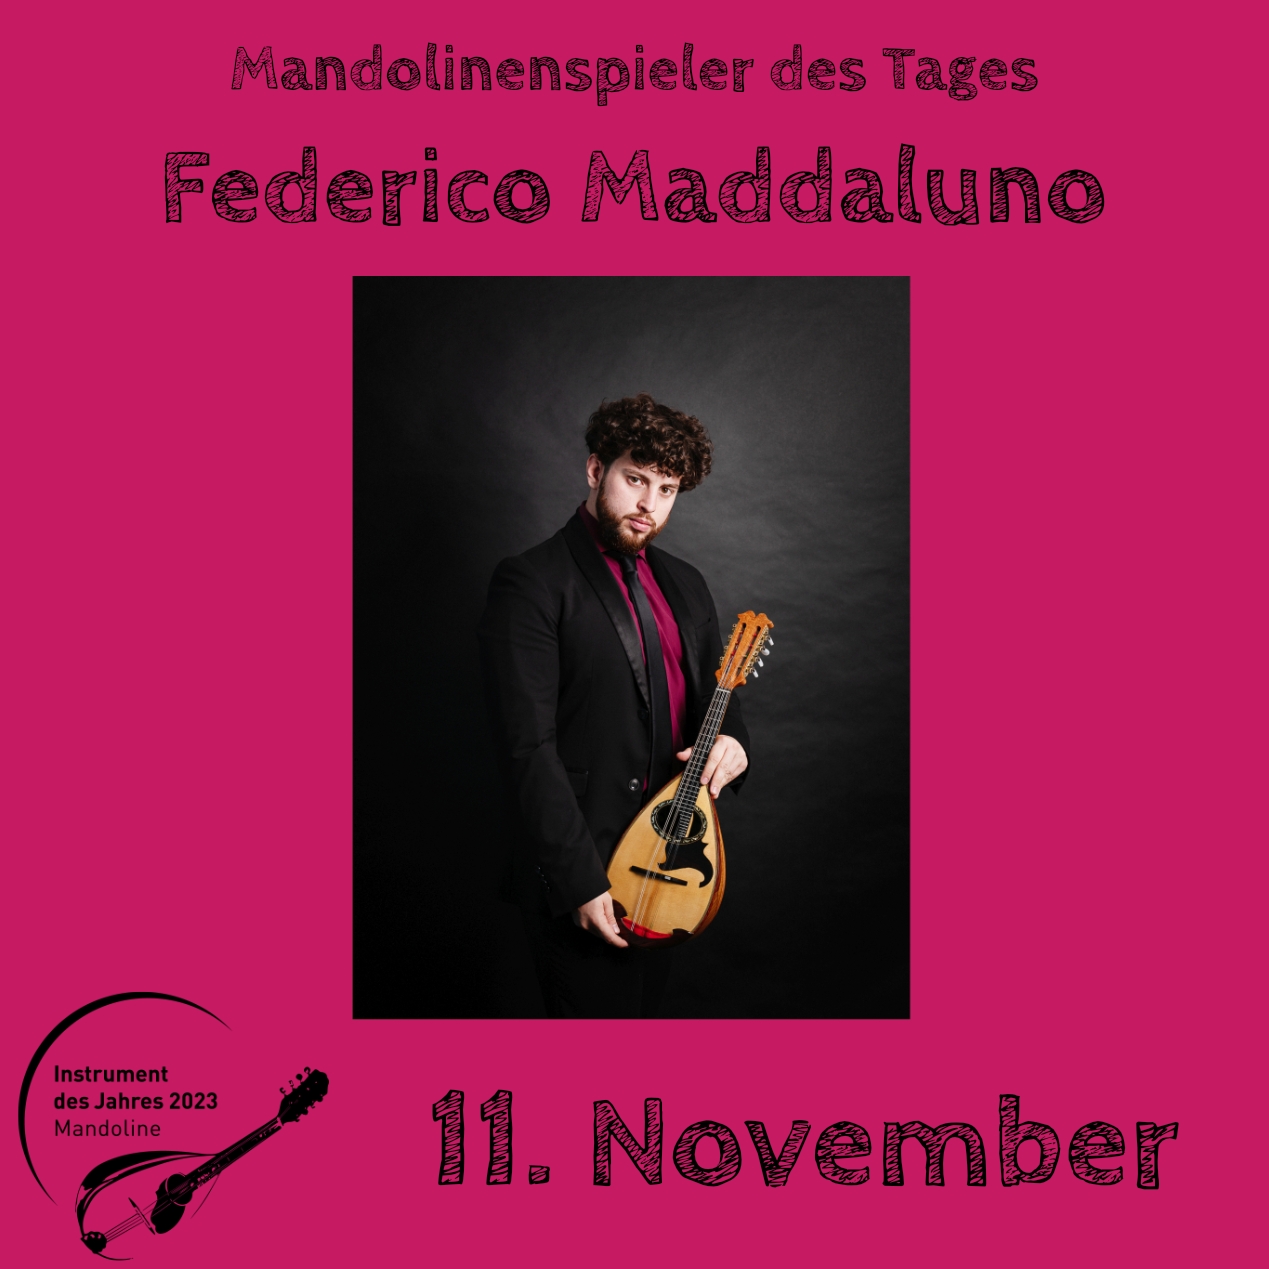 You are currently viewing 11. November – Federico Maddaluno